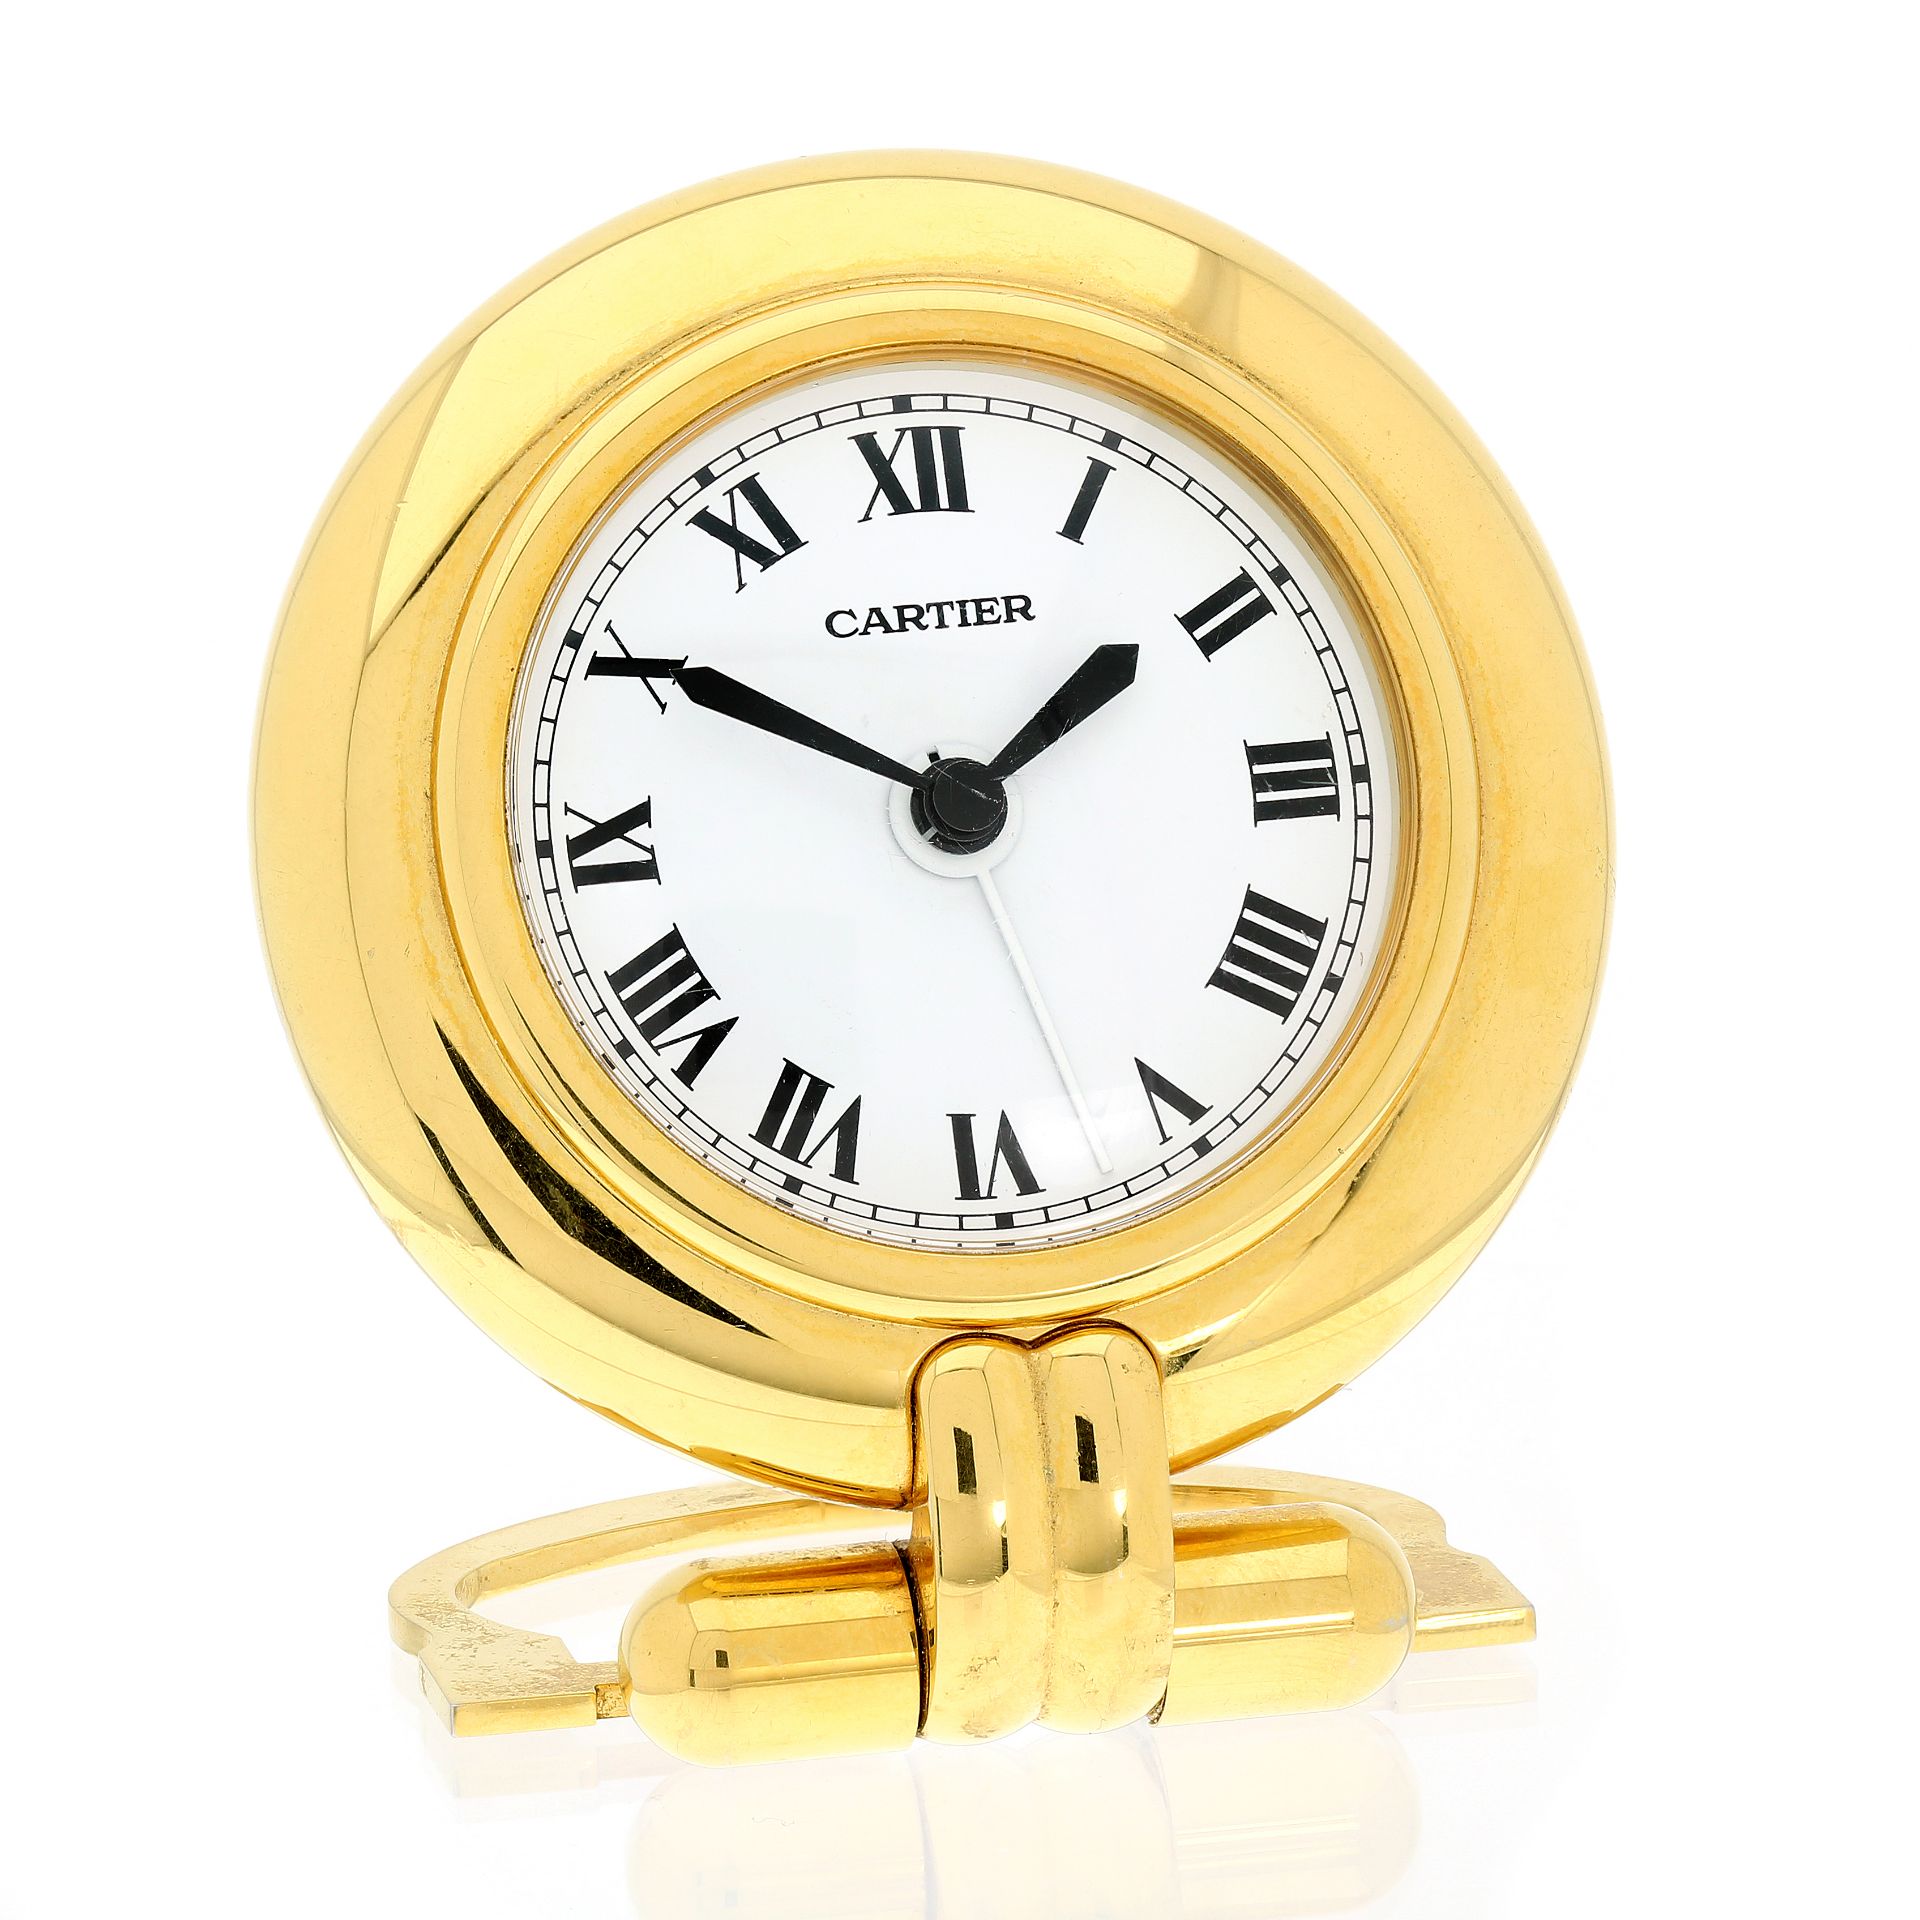 A VINTAGE TRAVEL / DESK CLOCK, CARTIER CIRCA 1980 24 carat gold plated, of circular form with a